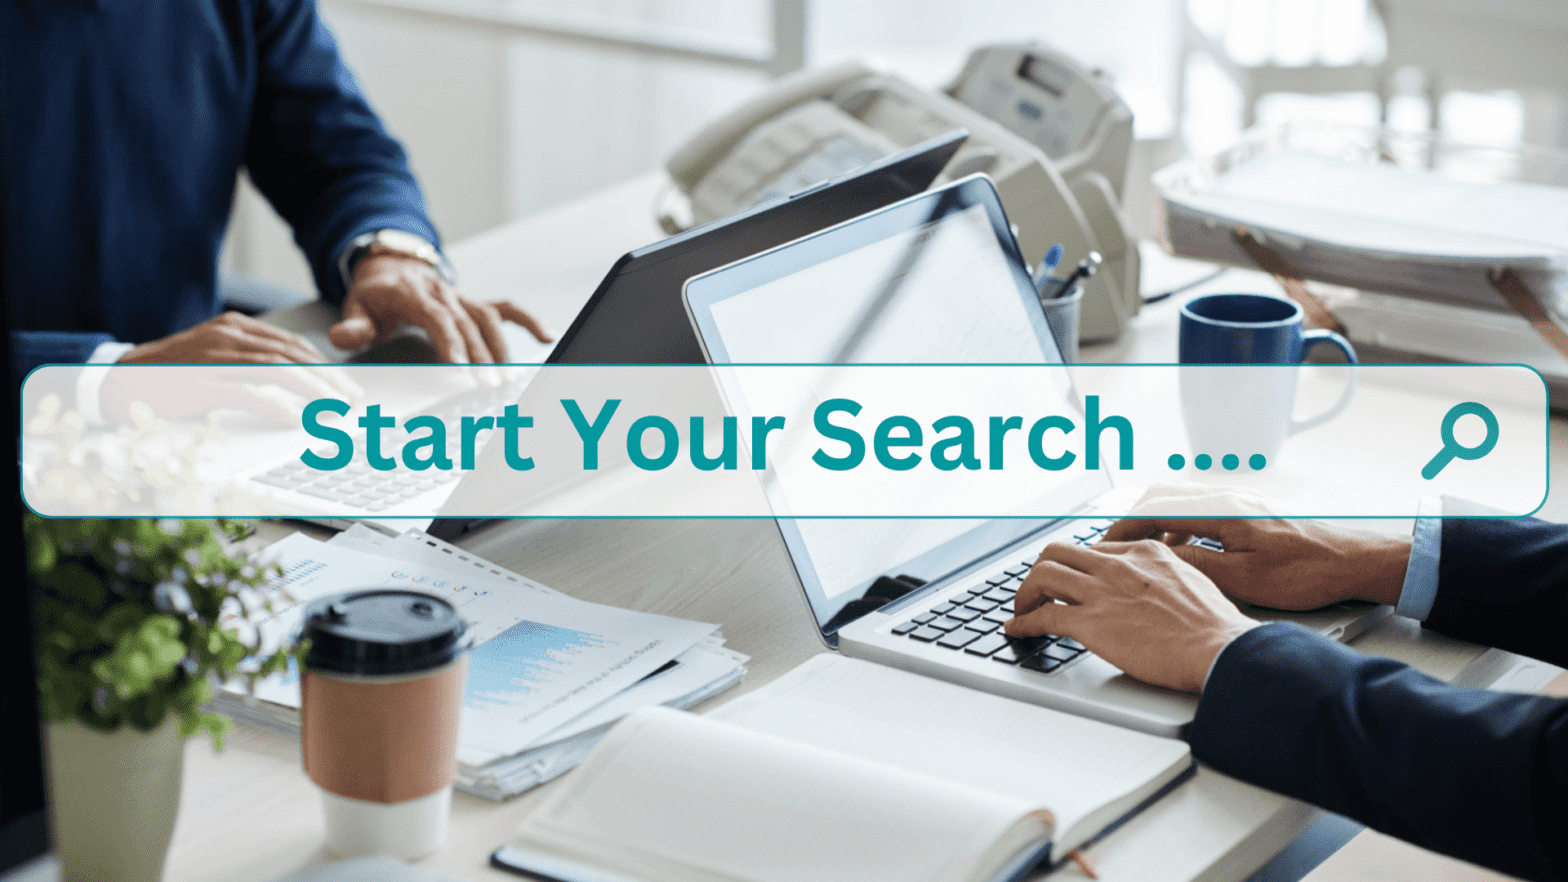 Top 100 Search Engines List